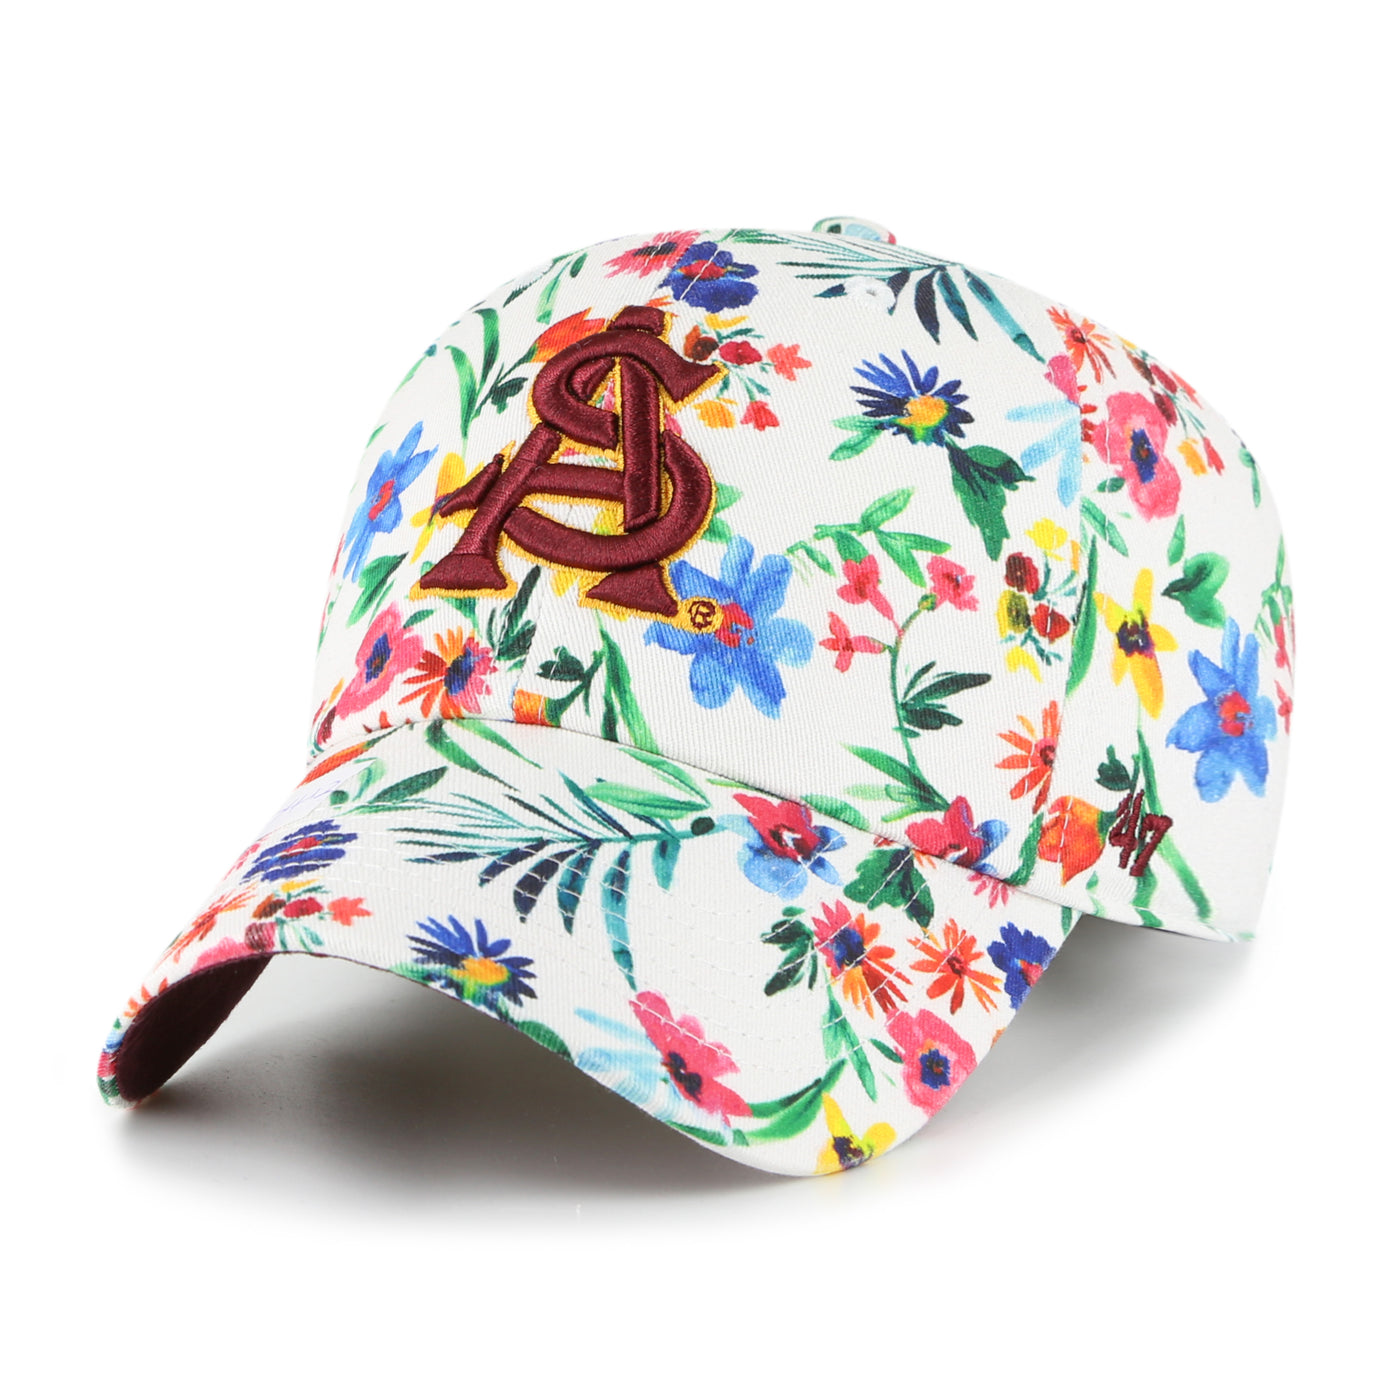 ASU white hat with floral design and a maroon interlocking 'A' and 'S' embroidered on